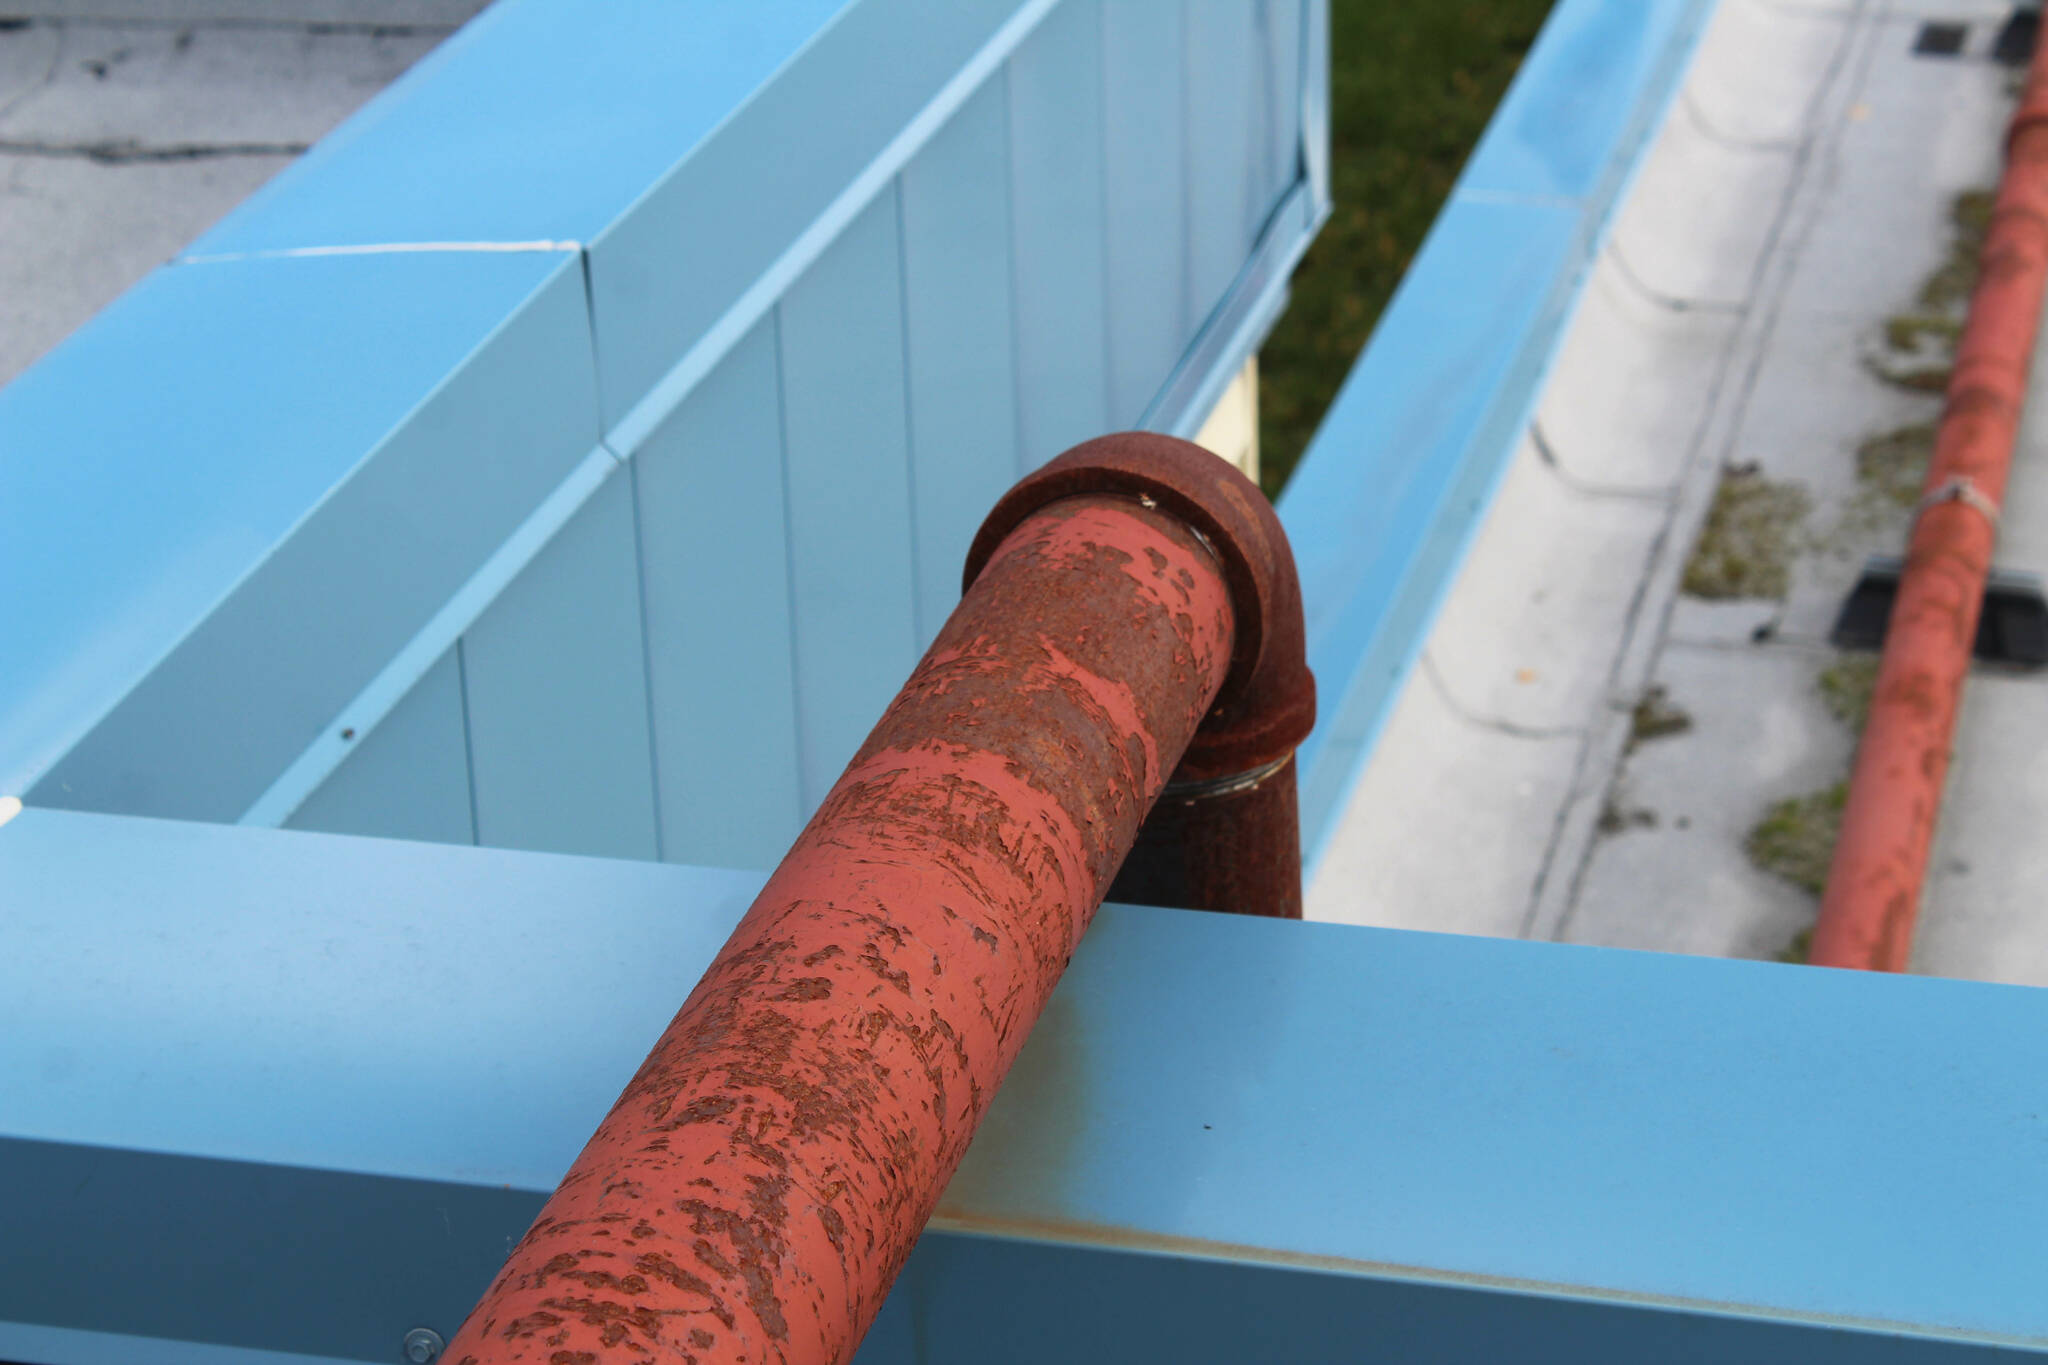 Natural gas pipes, used to for heating, are anchored to the outside of Soldotna Elementary School on Friday, Sept. 30, 2022, in Soldotna, Alaska. (Ashlyn O’Hara/Peninsula Clarion)